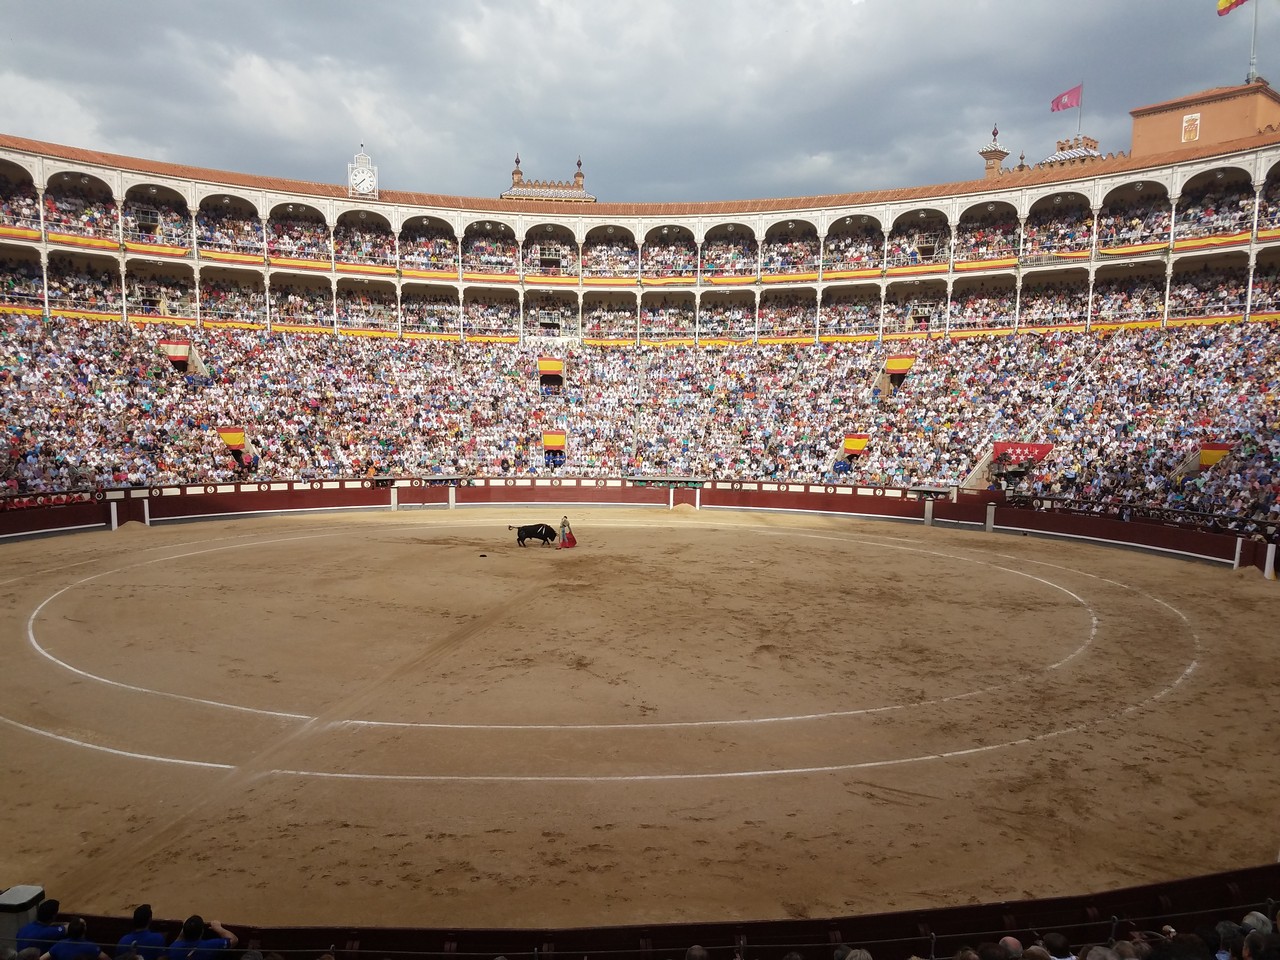 a bull in a arena with a crowd of people